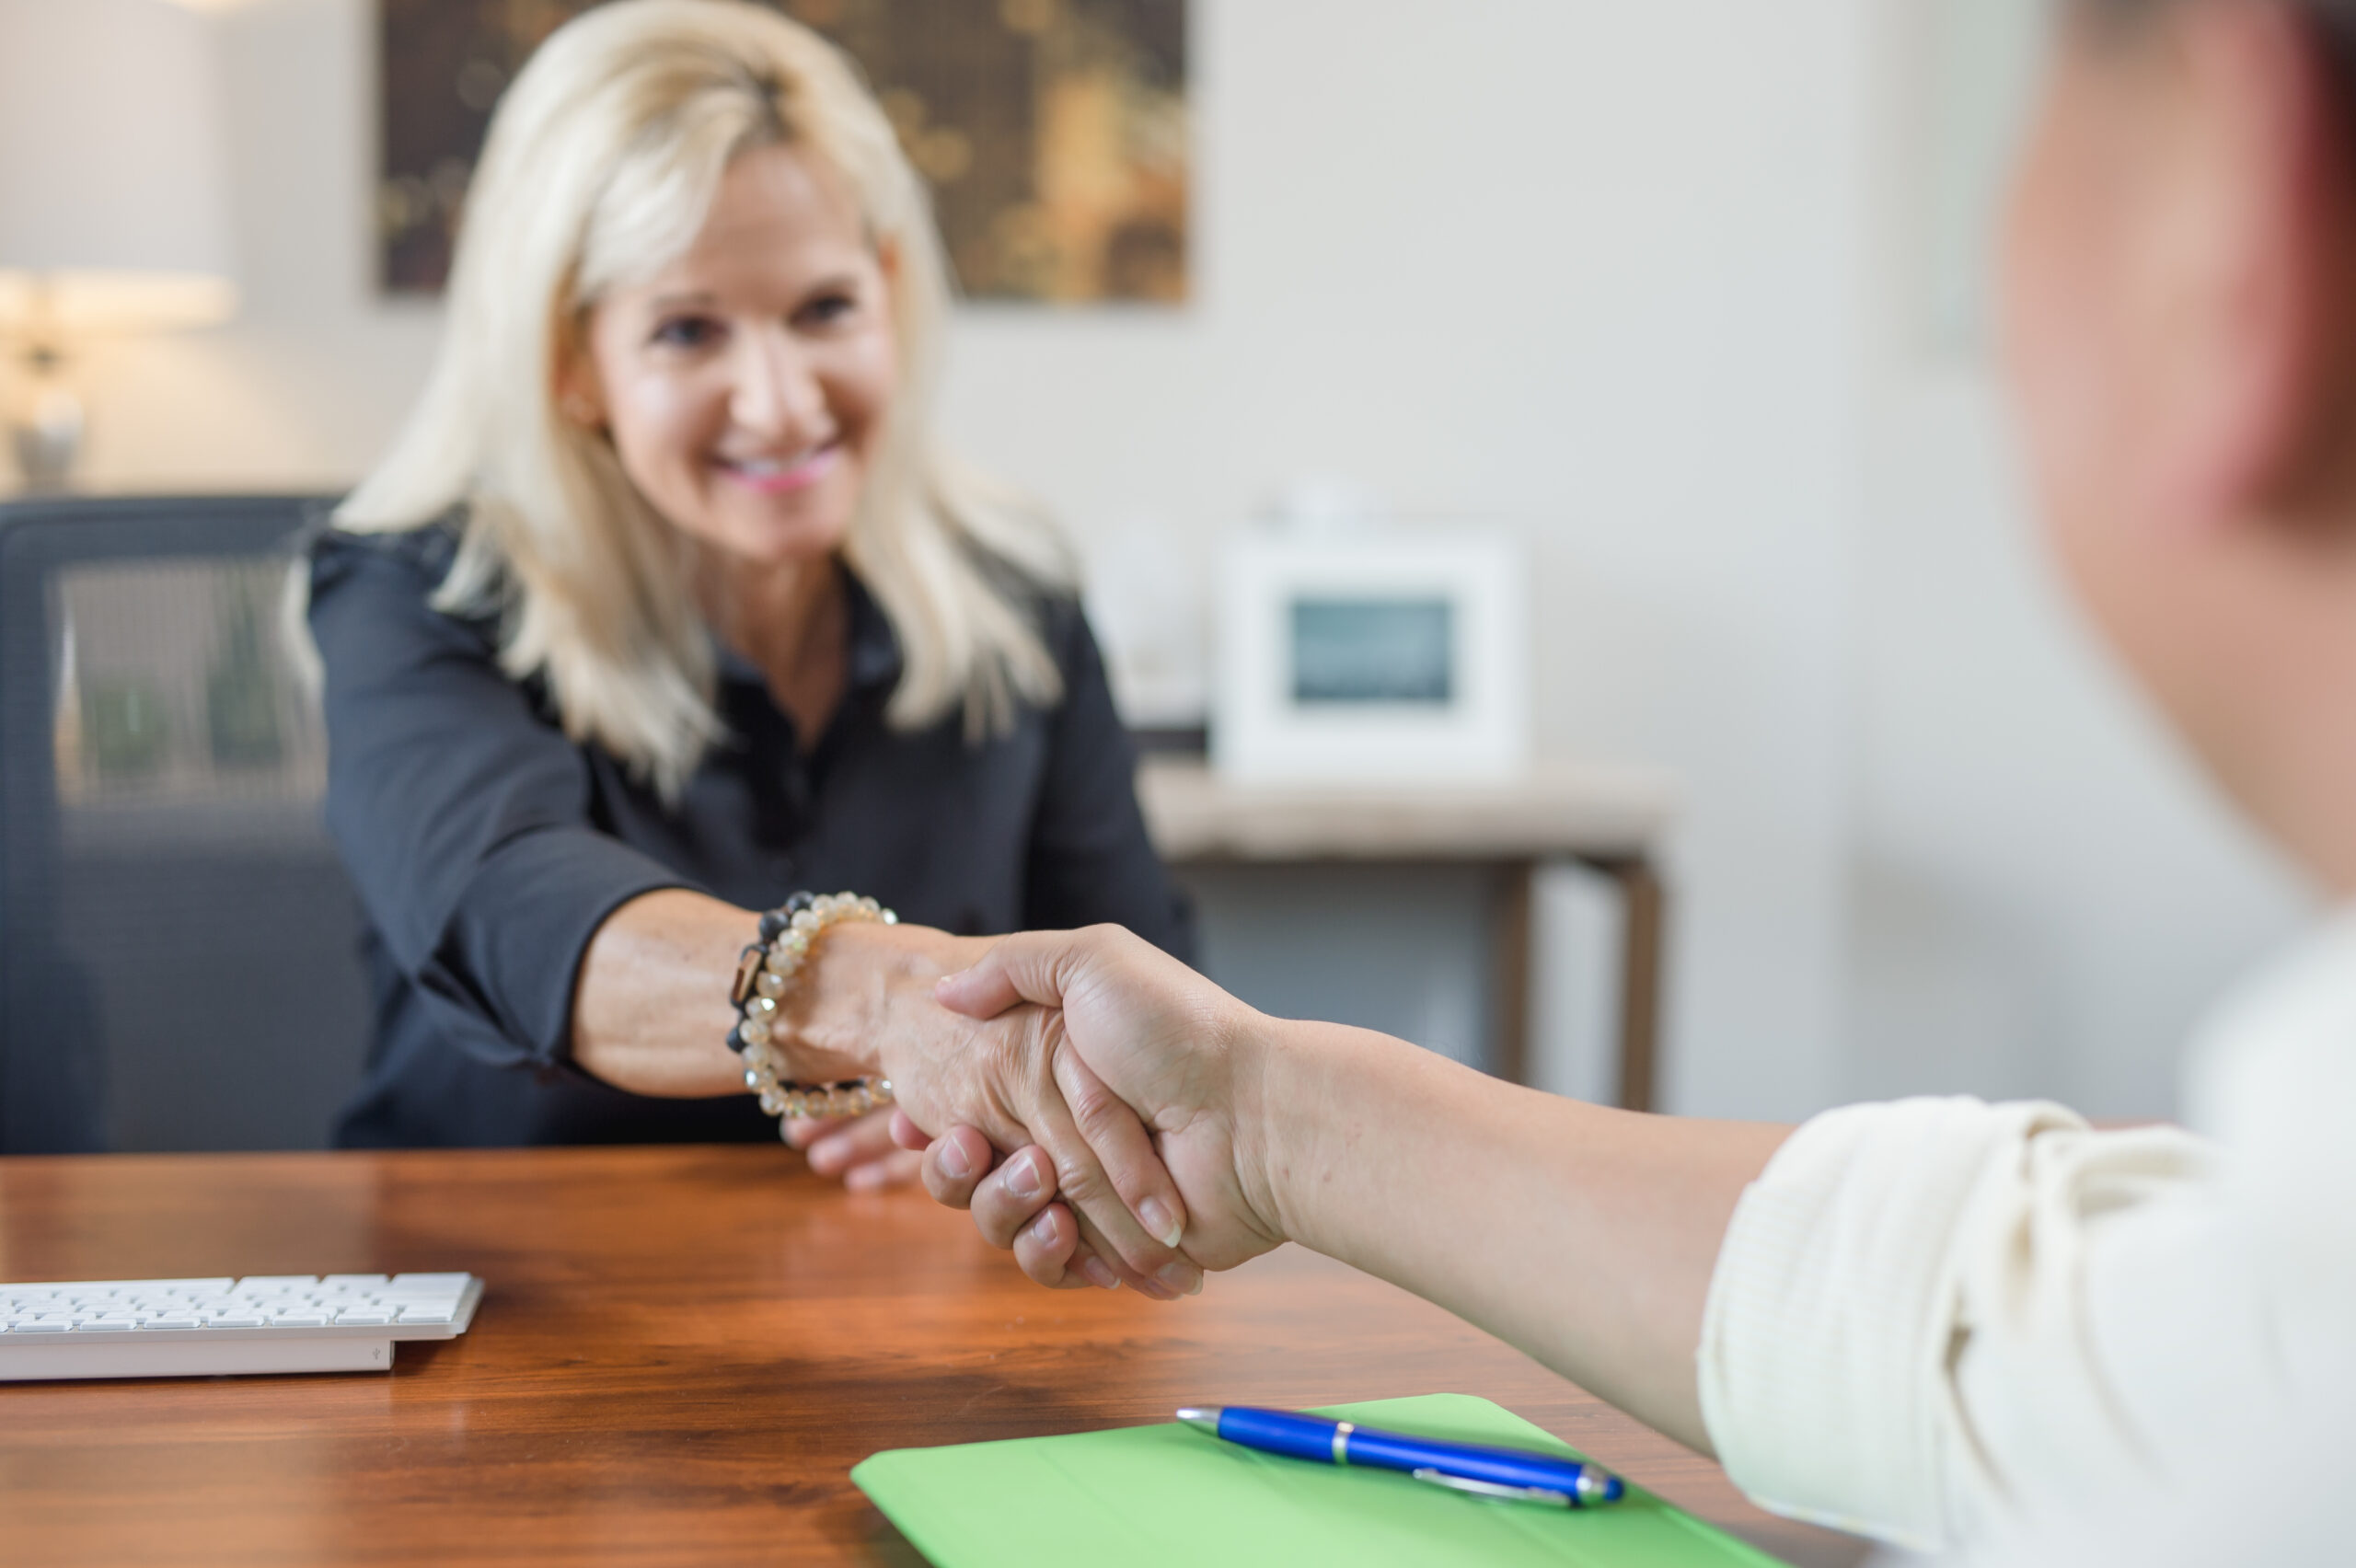 business owner shaking hands in agreement with commercial cleaning company